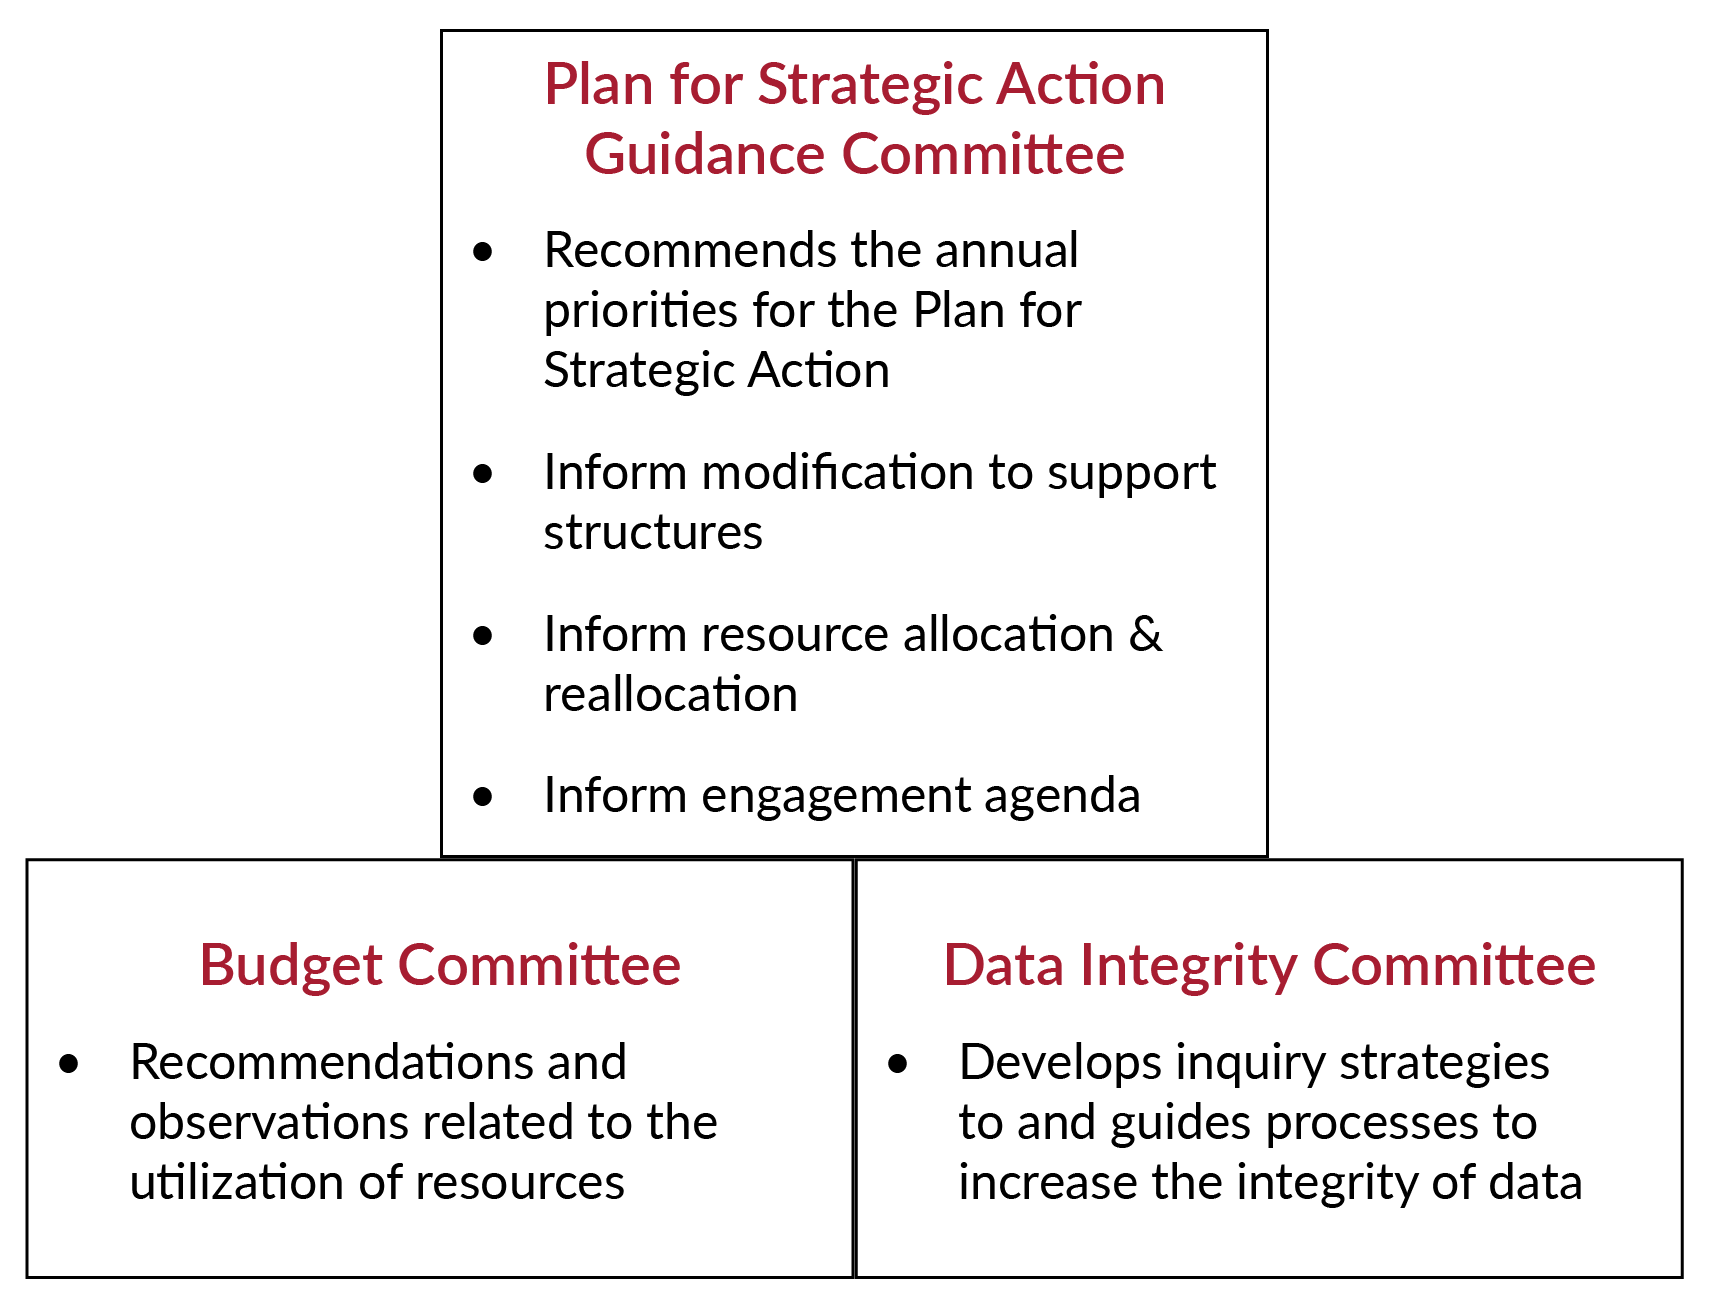 A sample illustration of how implementing the Plan for Strategic Actions to Take Charge of Our Future might be functionally achieved. The structure adopted to implement the Plan for Strategic Actions will be developed and evaluated in 2020-21 for endorsement as recommended by the president when Board of Trustees approves the FY22 Budget Plan.